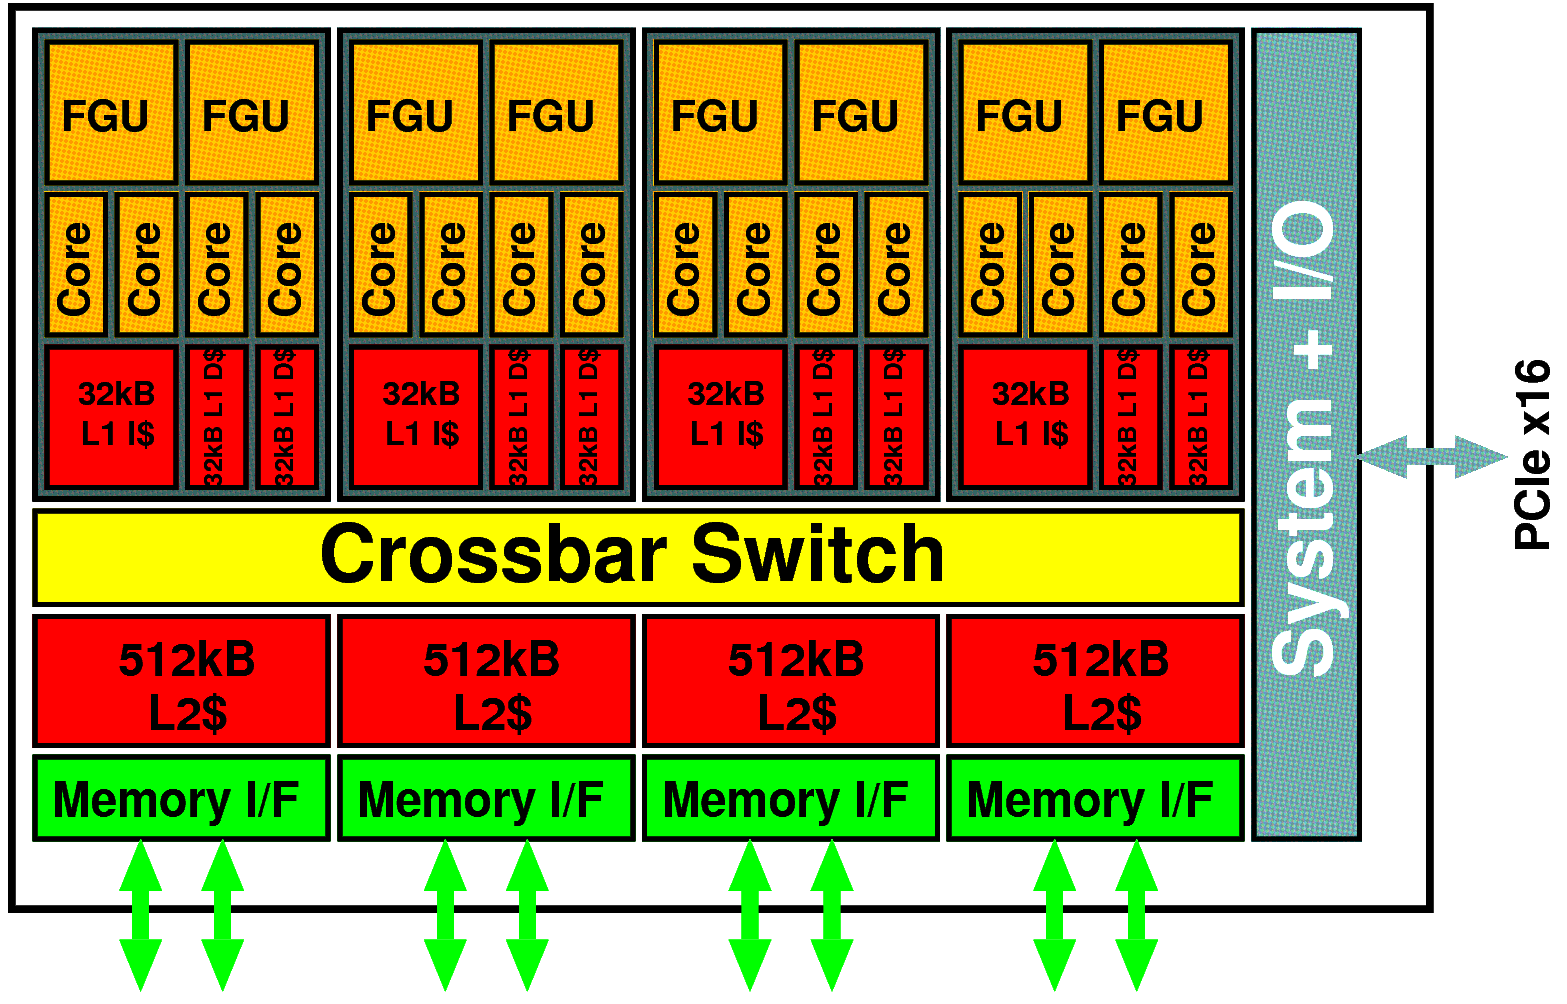 Sun Rock 65nm, 16 Cores, 2 visible Threads / Core 32 Threads per Socket 4 Core Clusters mit je 4 Cores je Cluster: 32kB I$ 2x 32kB